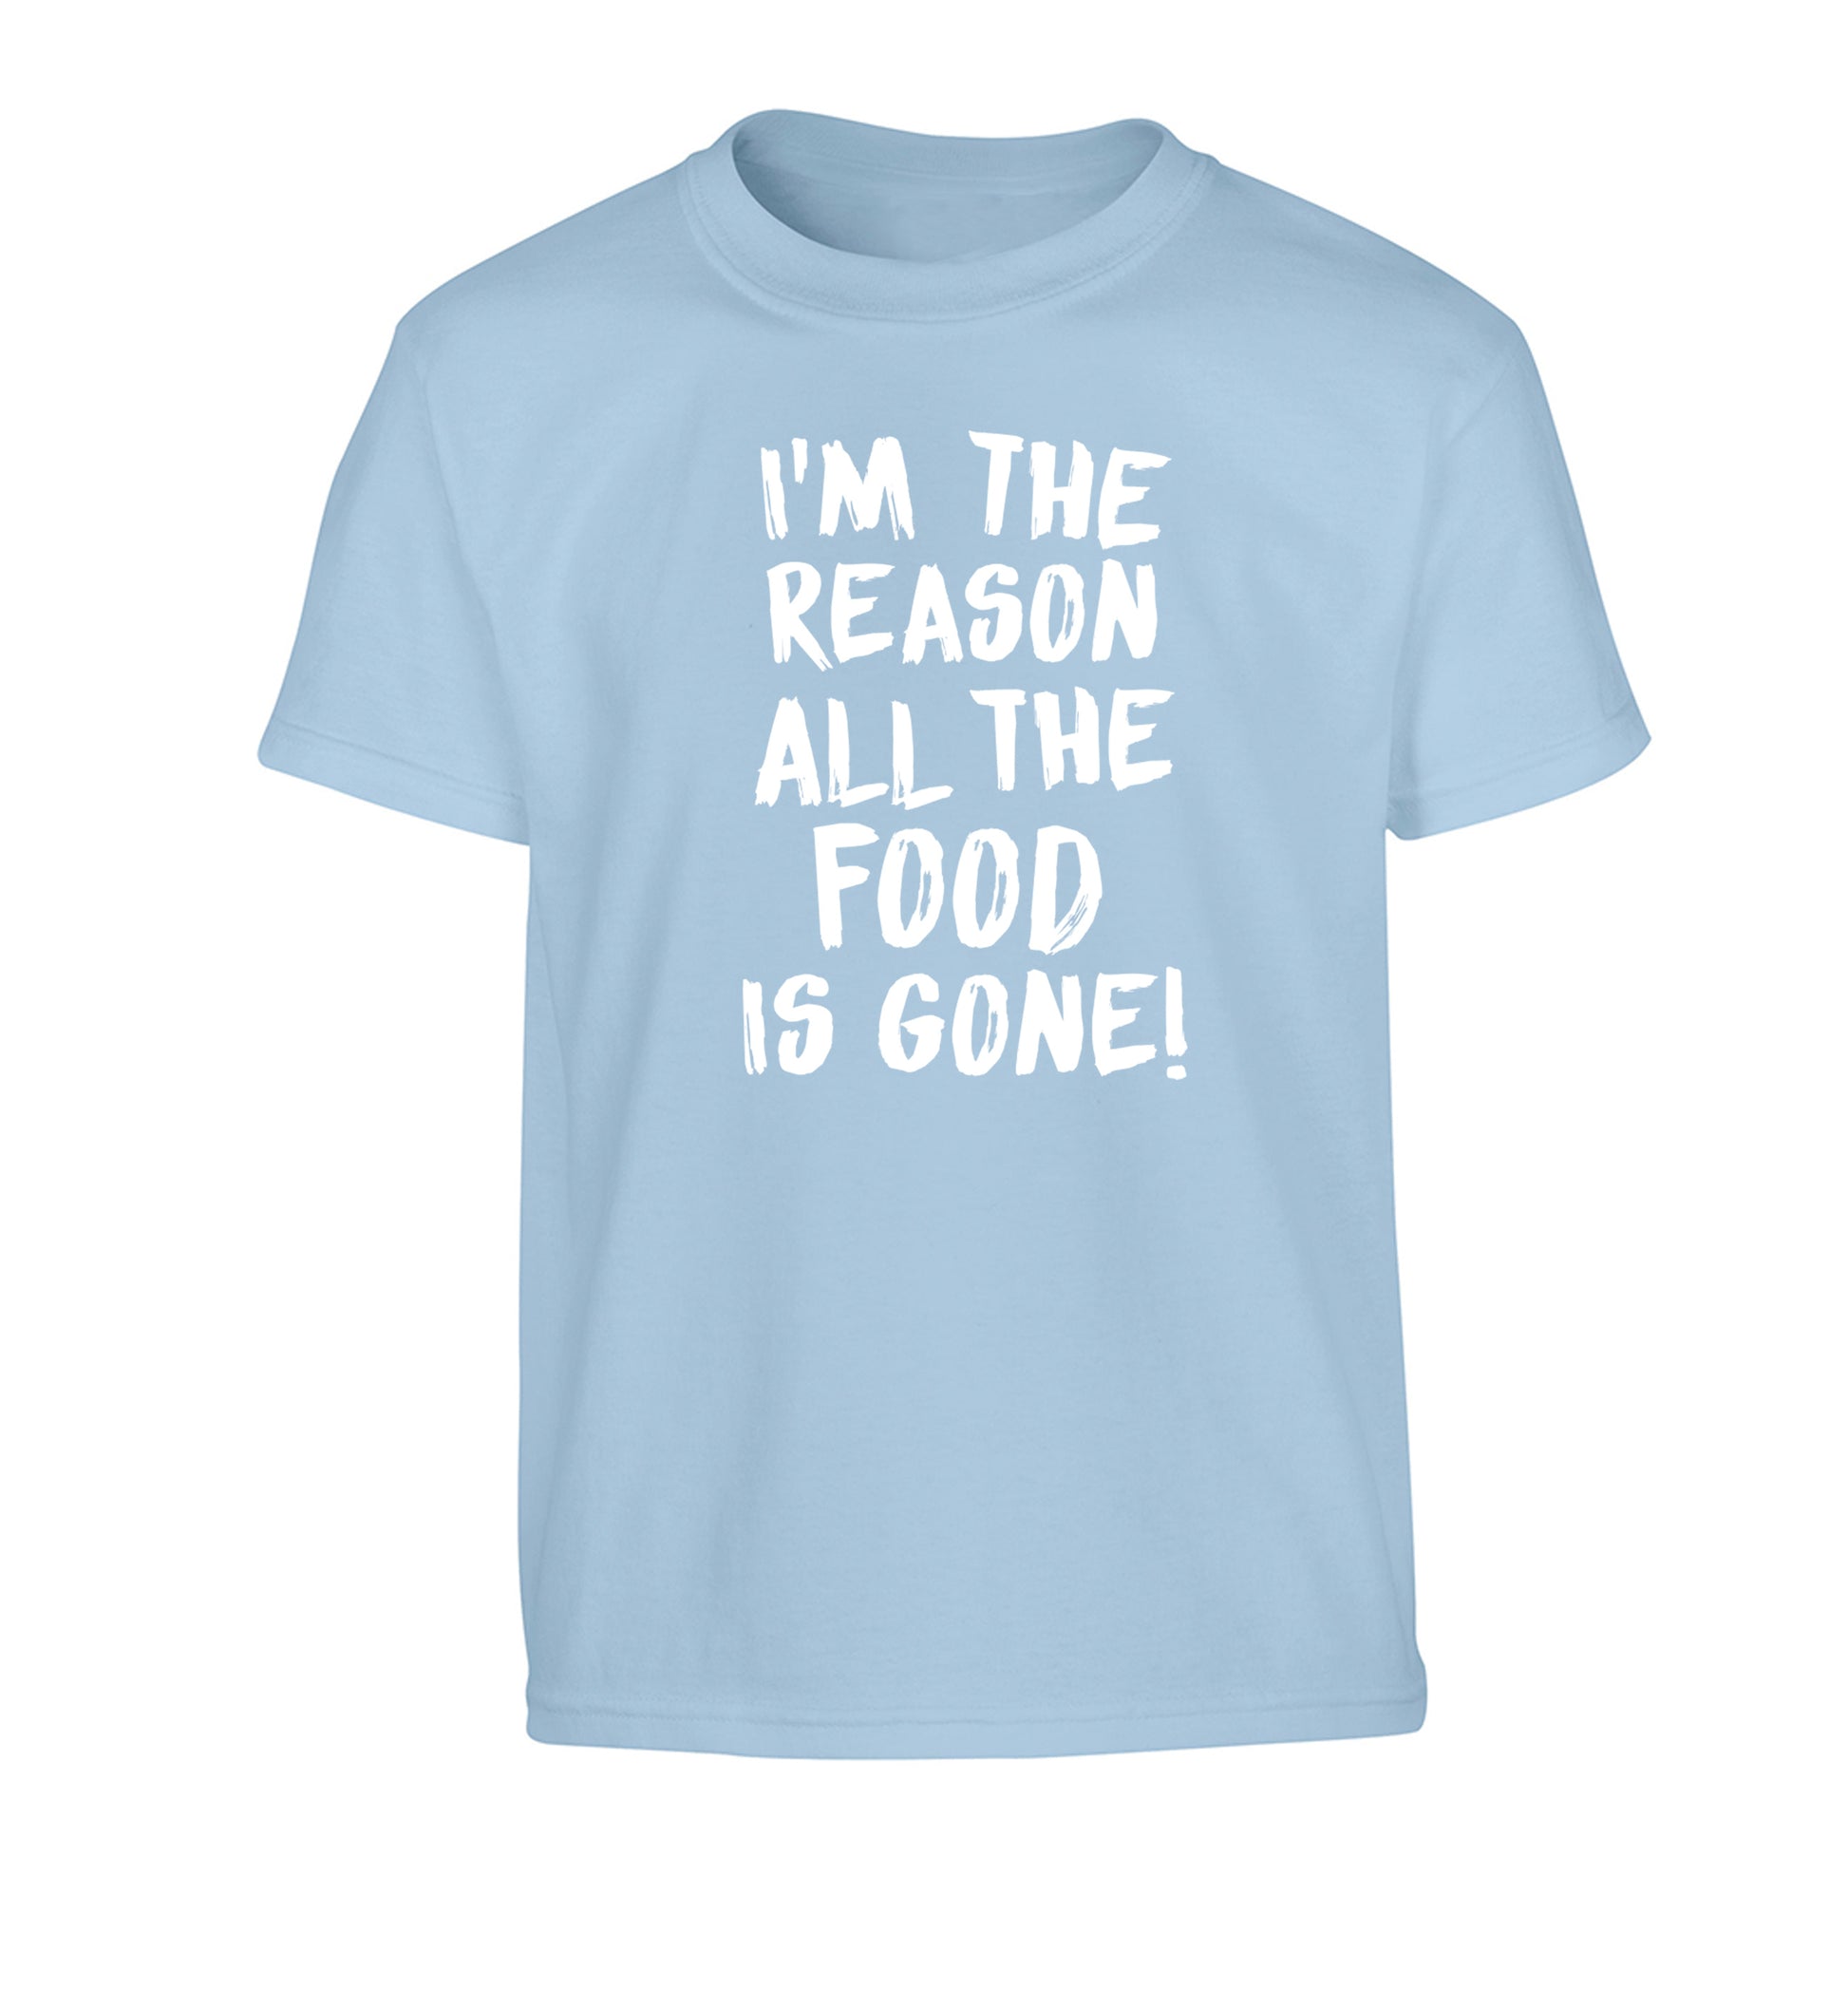 I'm the reason why all the food is gone Children's light blue Tshirt 12-13 Years